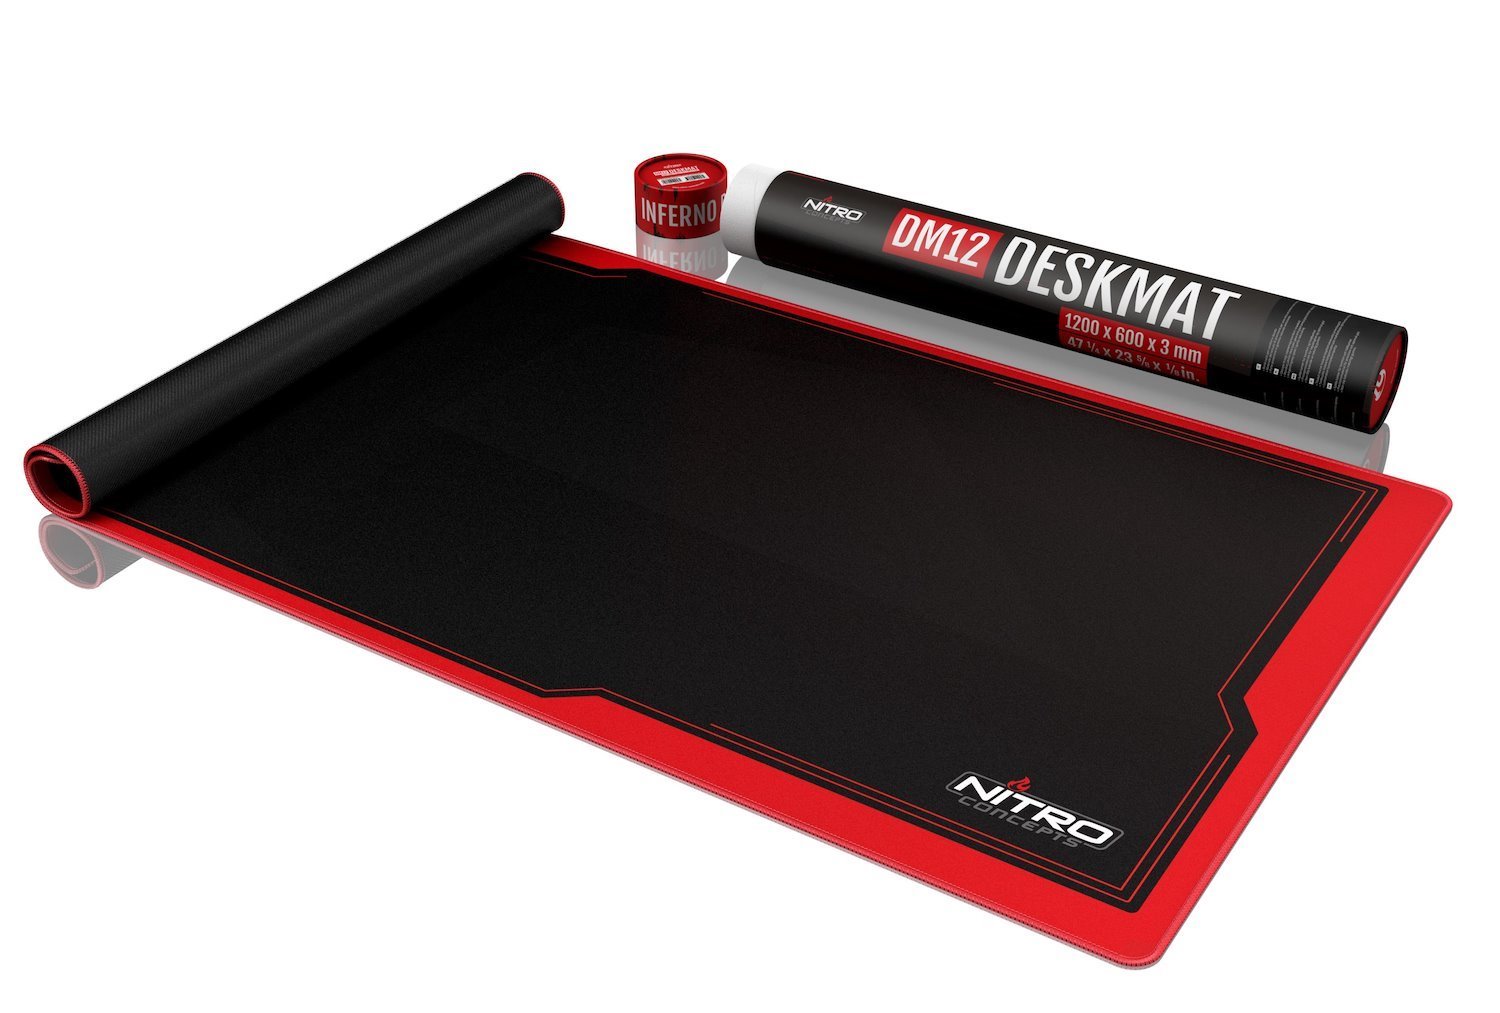 Nitro Concepts DM12 Gaming Mouse Pad Black Red (Nitro Concepts Desk Mat 1200 X 600MM - Black/Red)